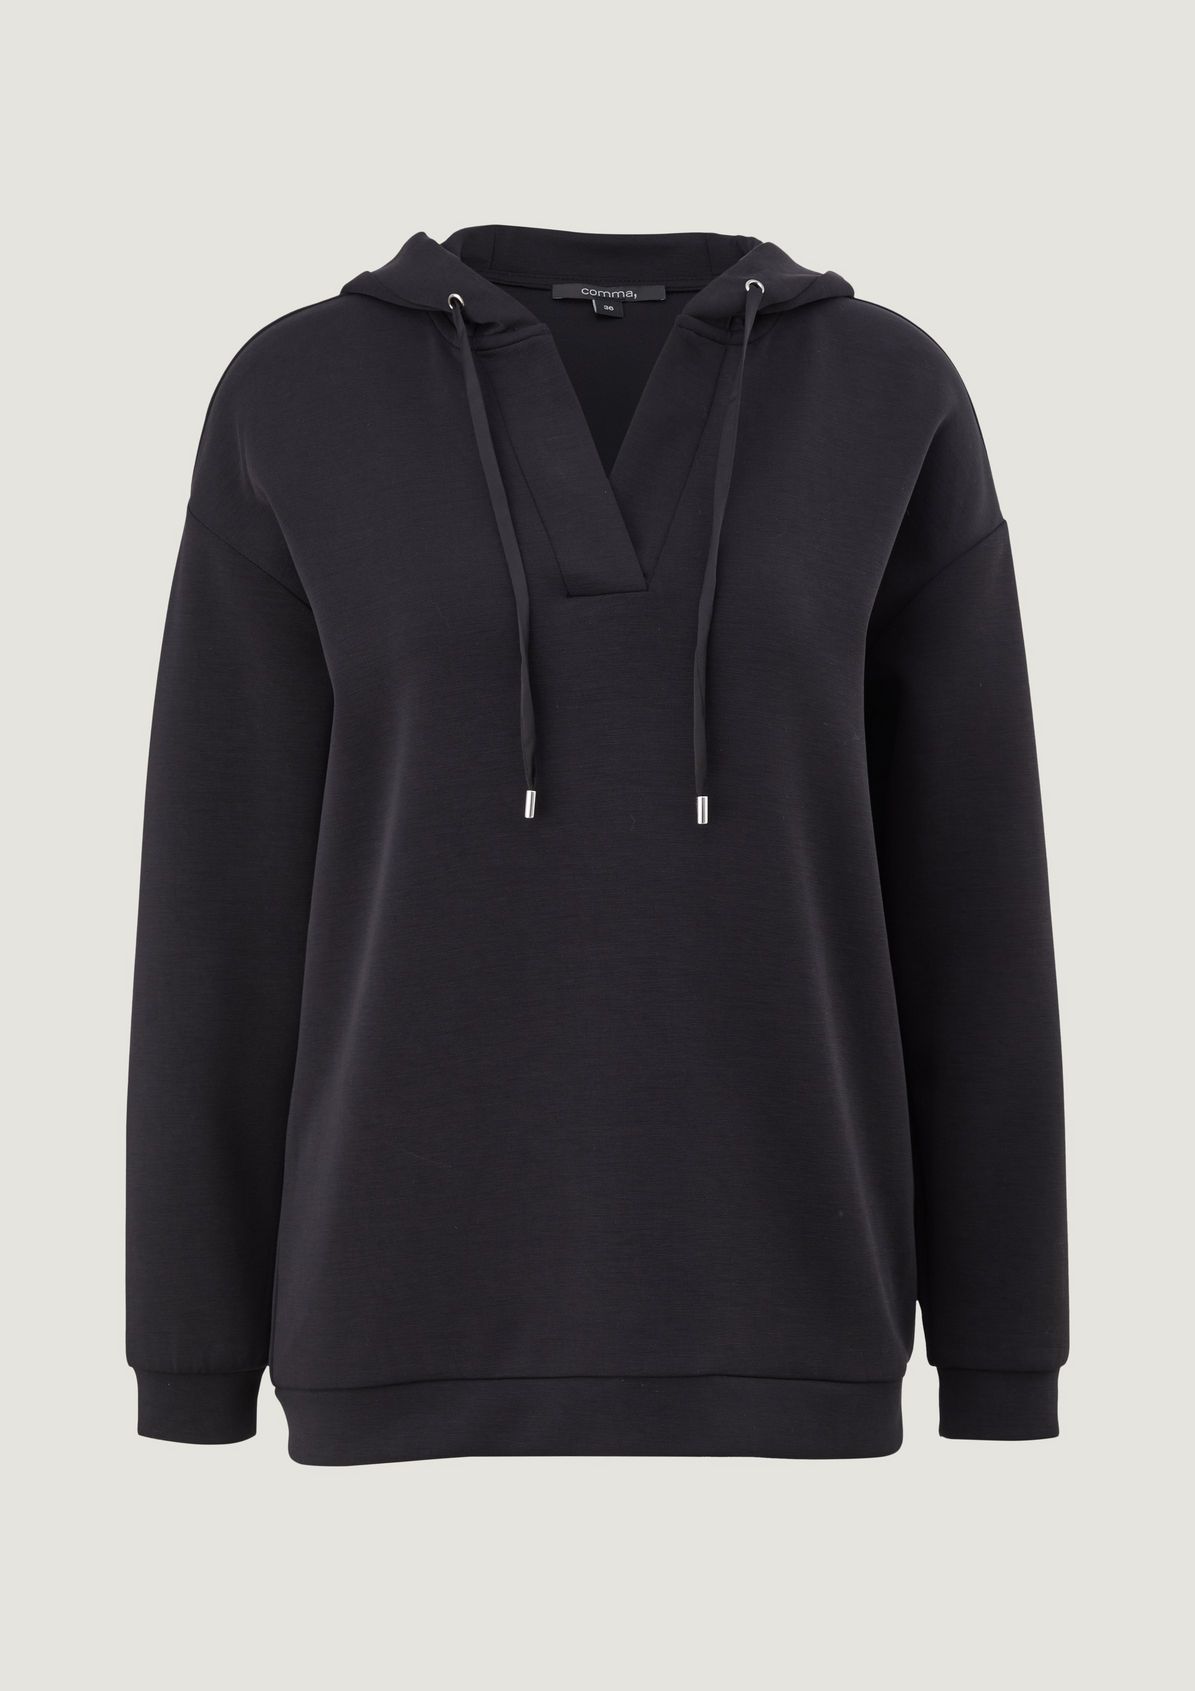 Hoodie in scuba fabric from comma